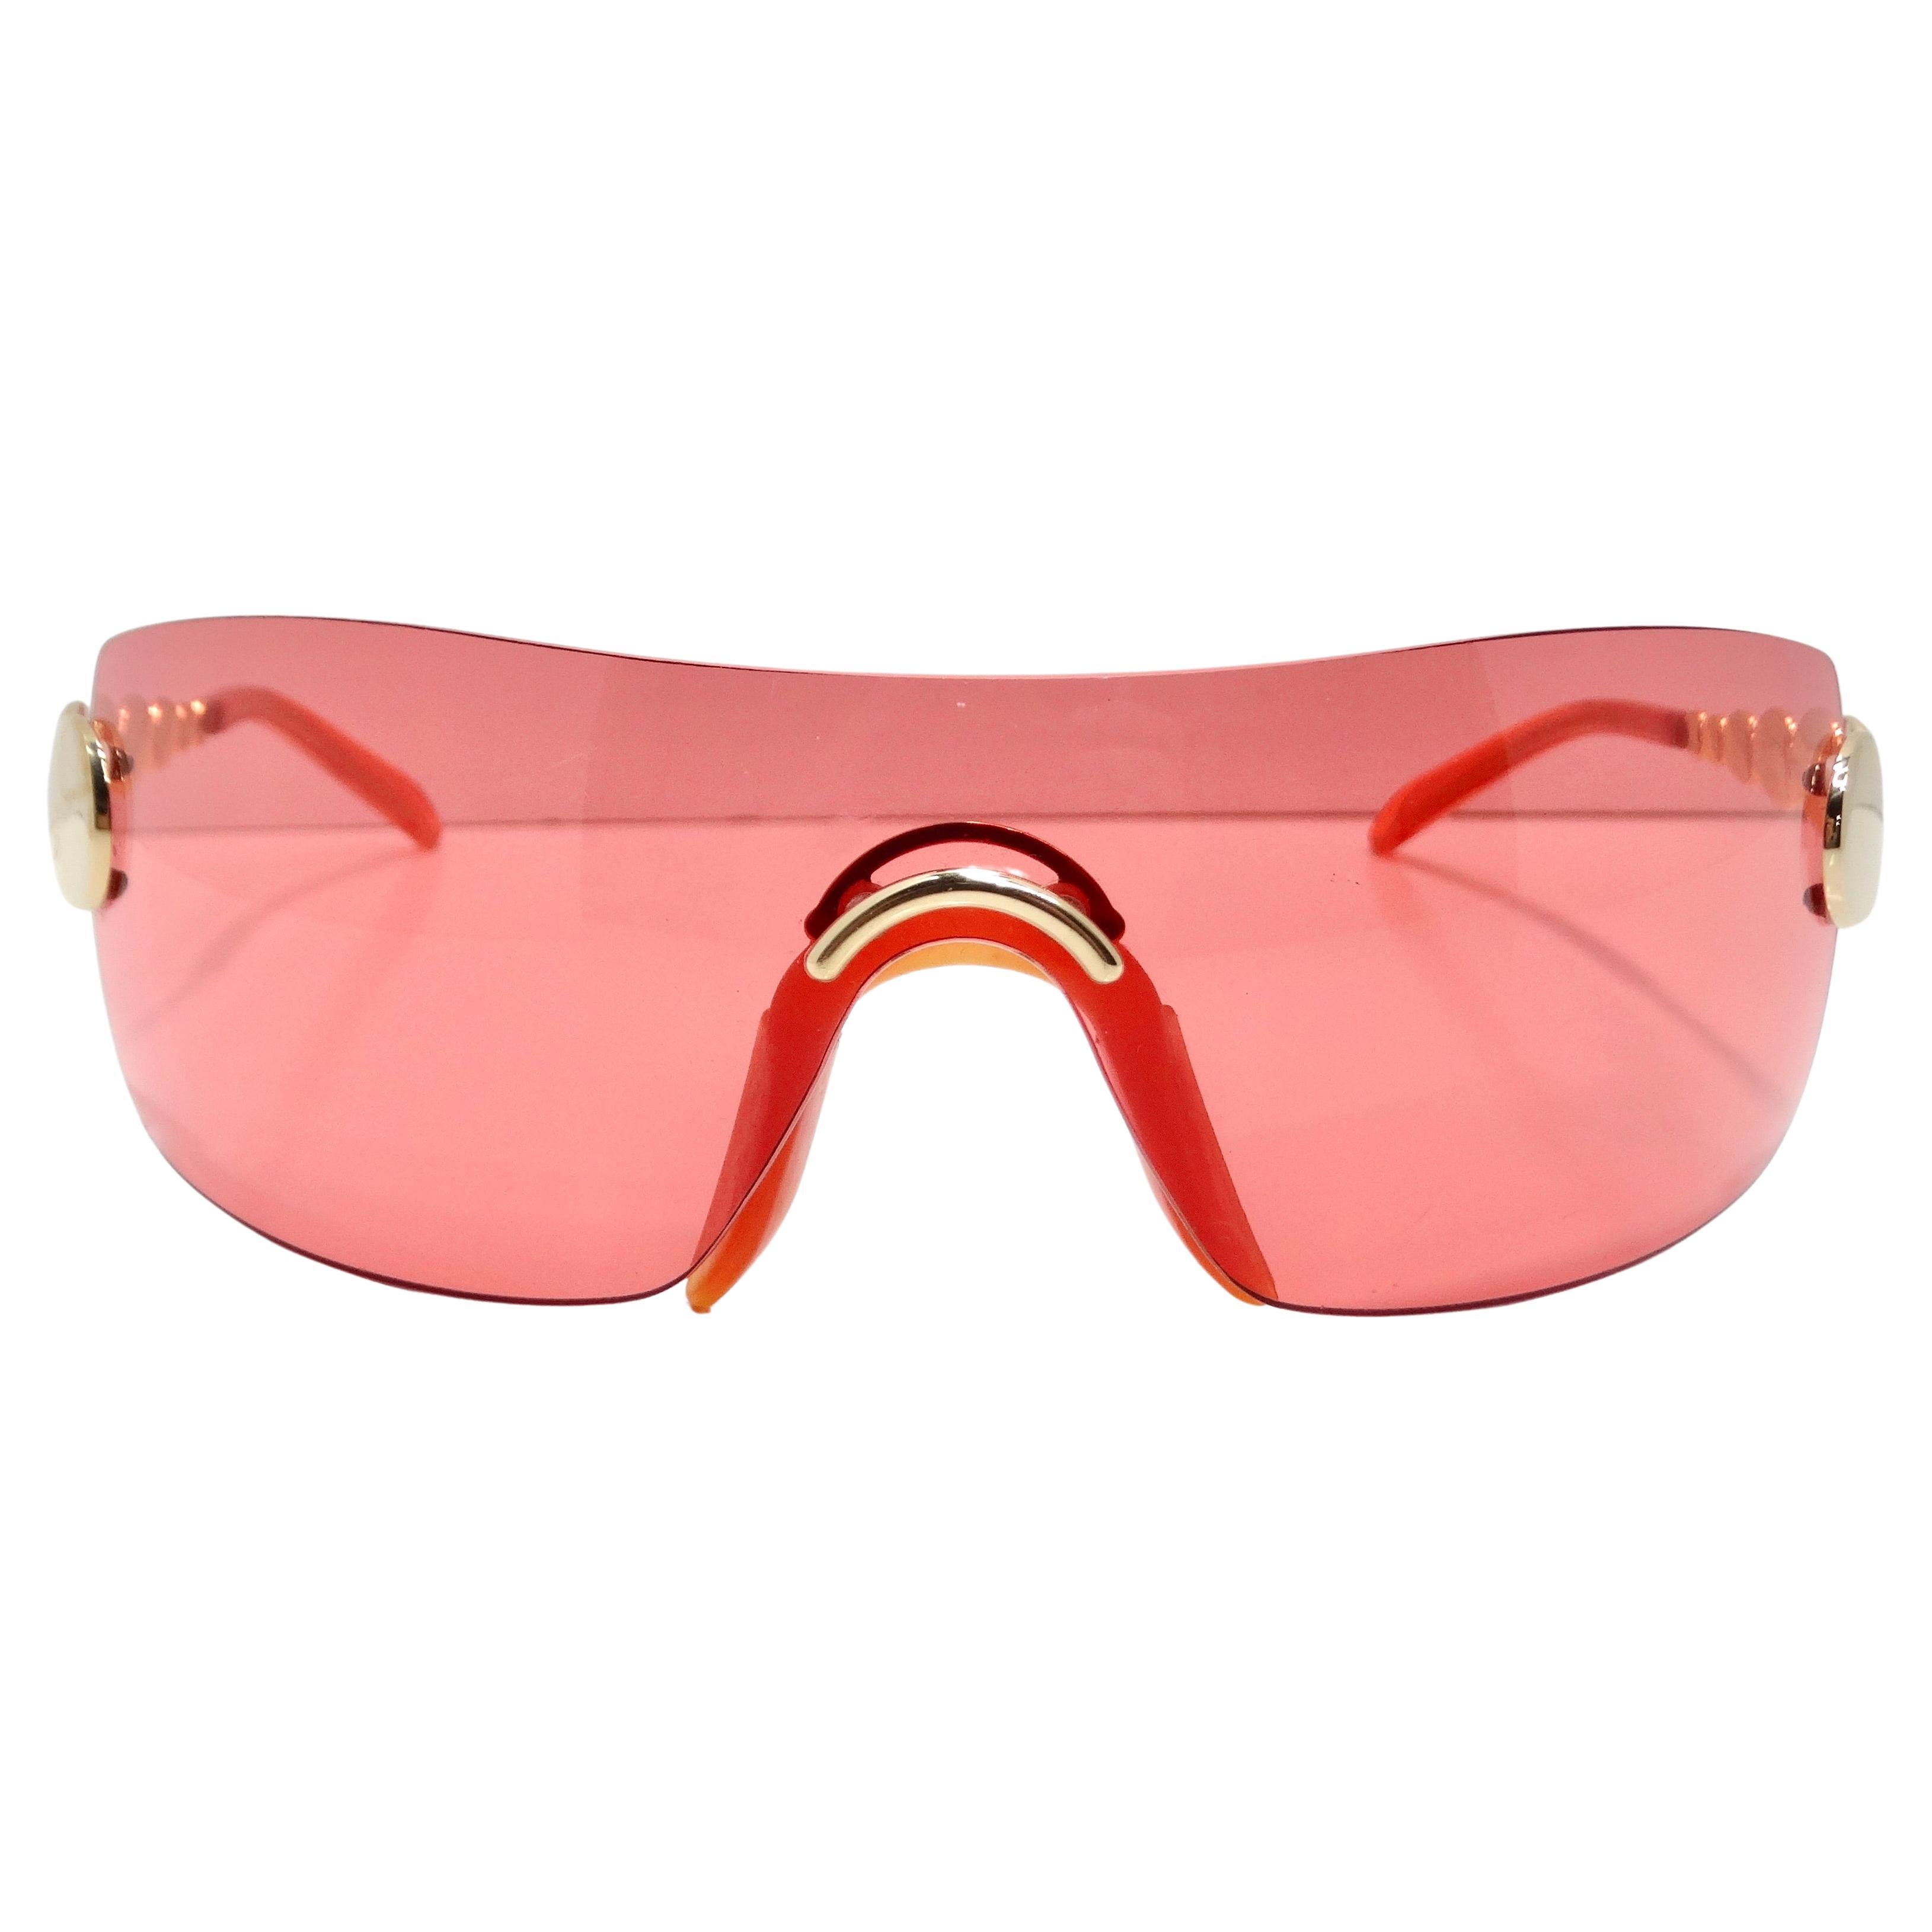 Christian Dior Spring 2004 Galliano Red Mask Sunglasses For Sale